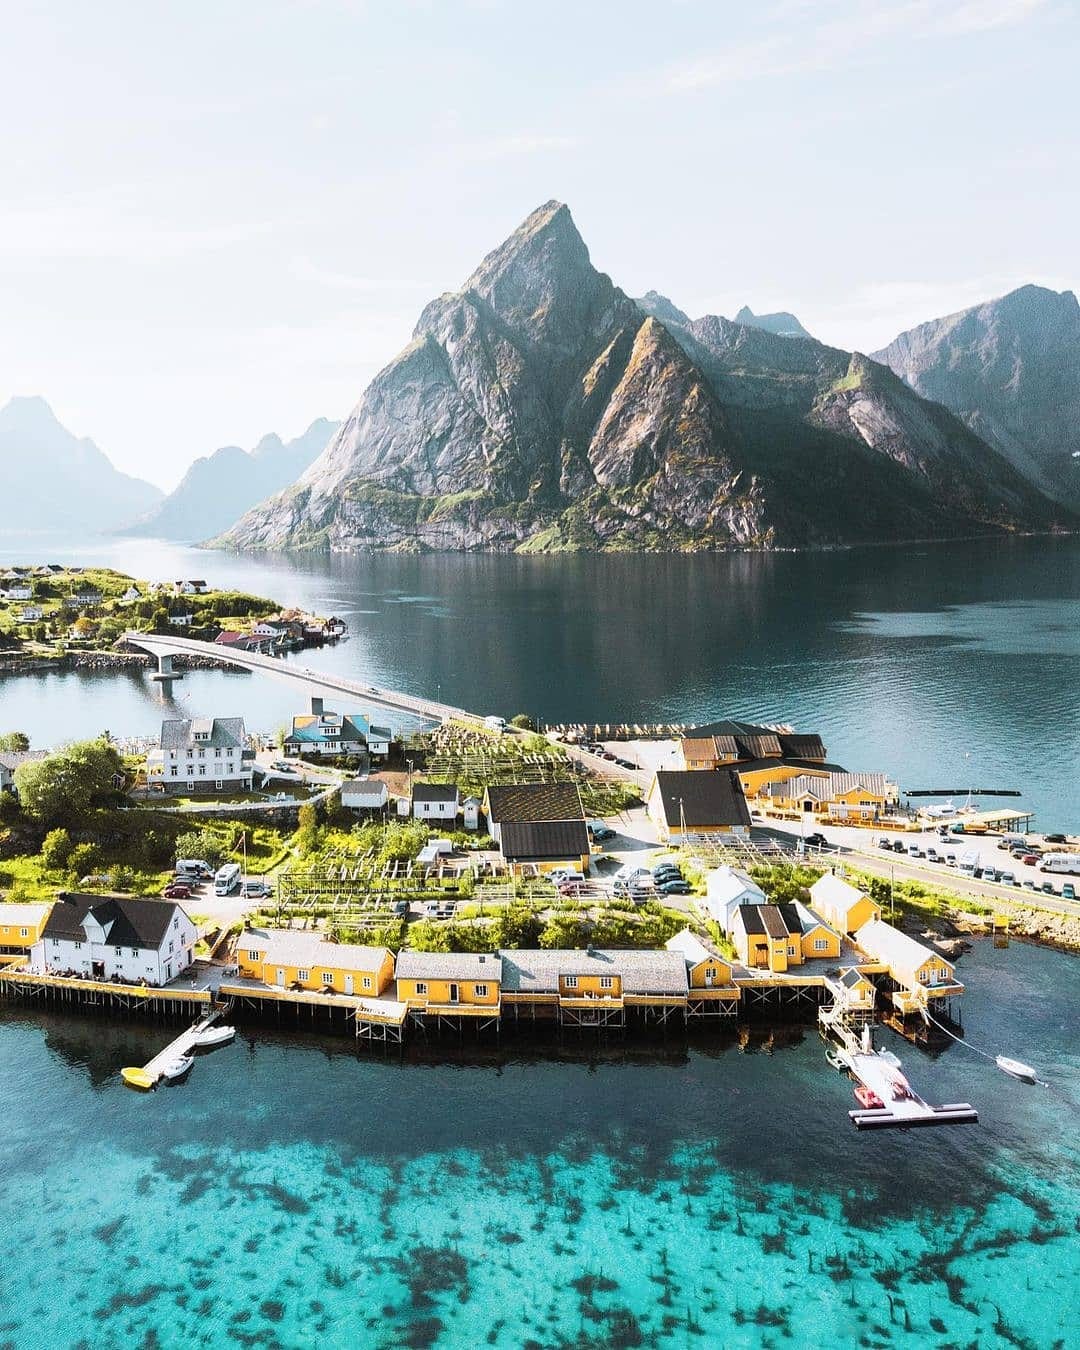 📍Lofoten is known for excellent fishing, nature attractions such as the northern lights and the midnight sun, and small villages off the beaten track. Kayak between the islands, go fishing for the catch of your life, or look for sea eagles soaring in the sky.